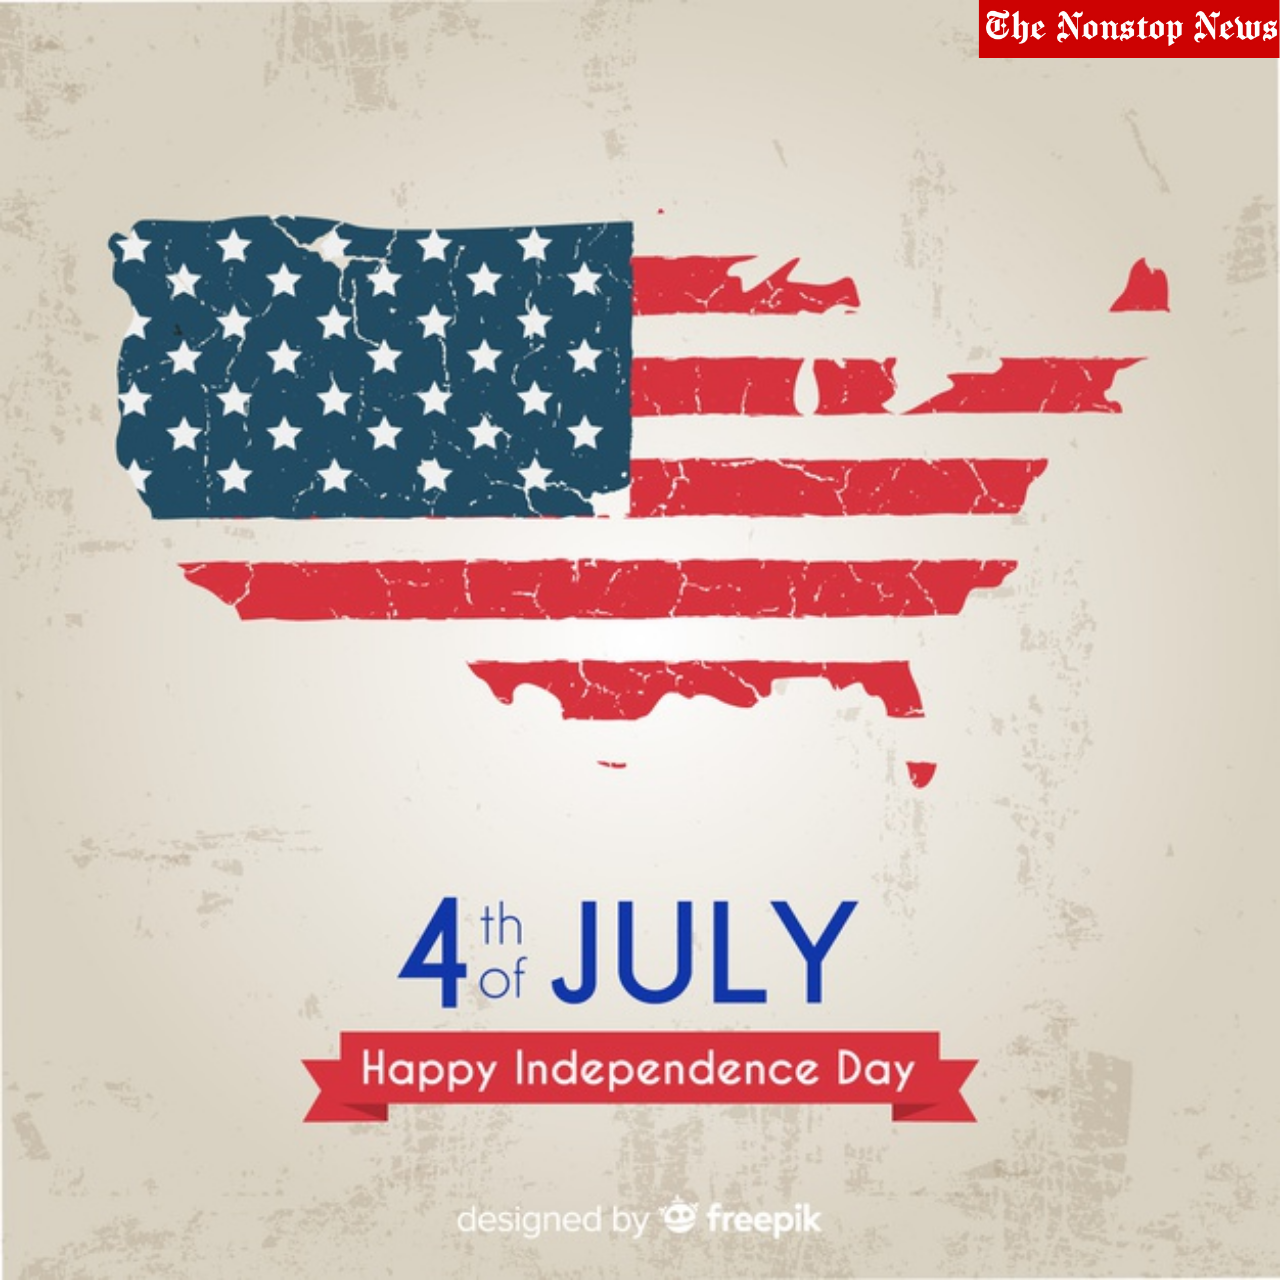 Independence Day (USA) 2021: WhatsApp Status Video to download to celebrate American Independence Day